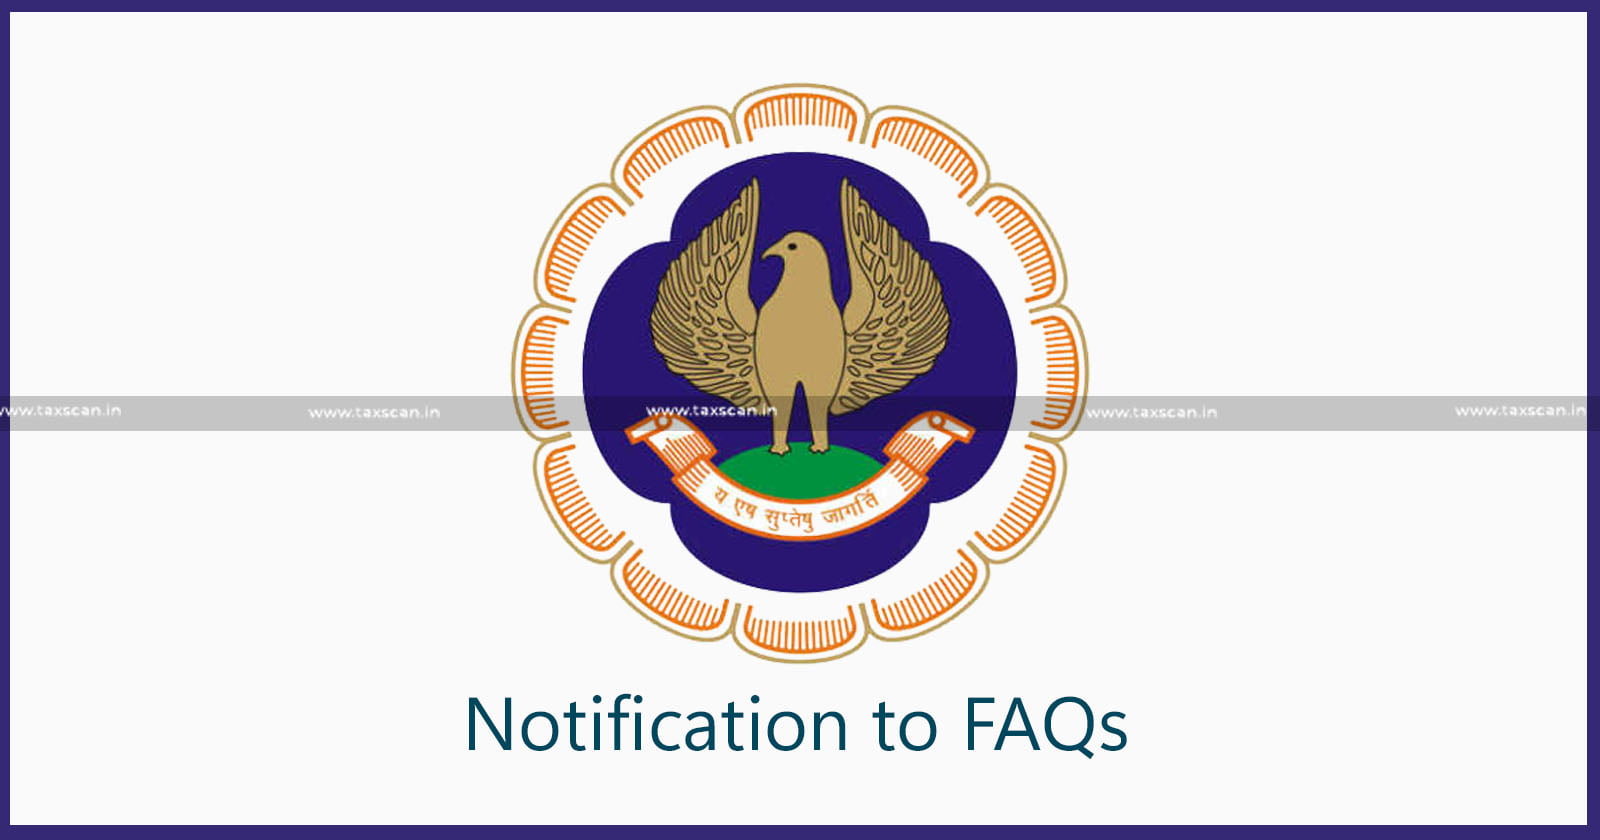 From Notification to FAQs - ICAI releases details of CA New Scheme of Education and Training - TAXSCAN